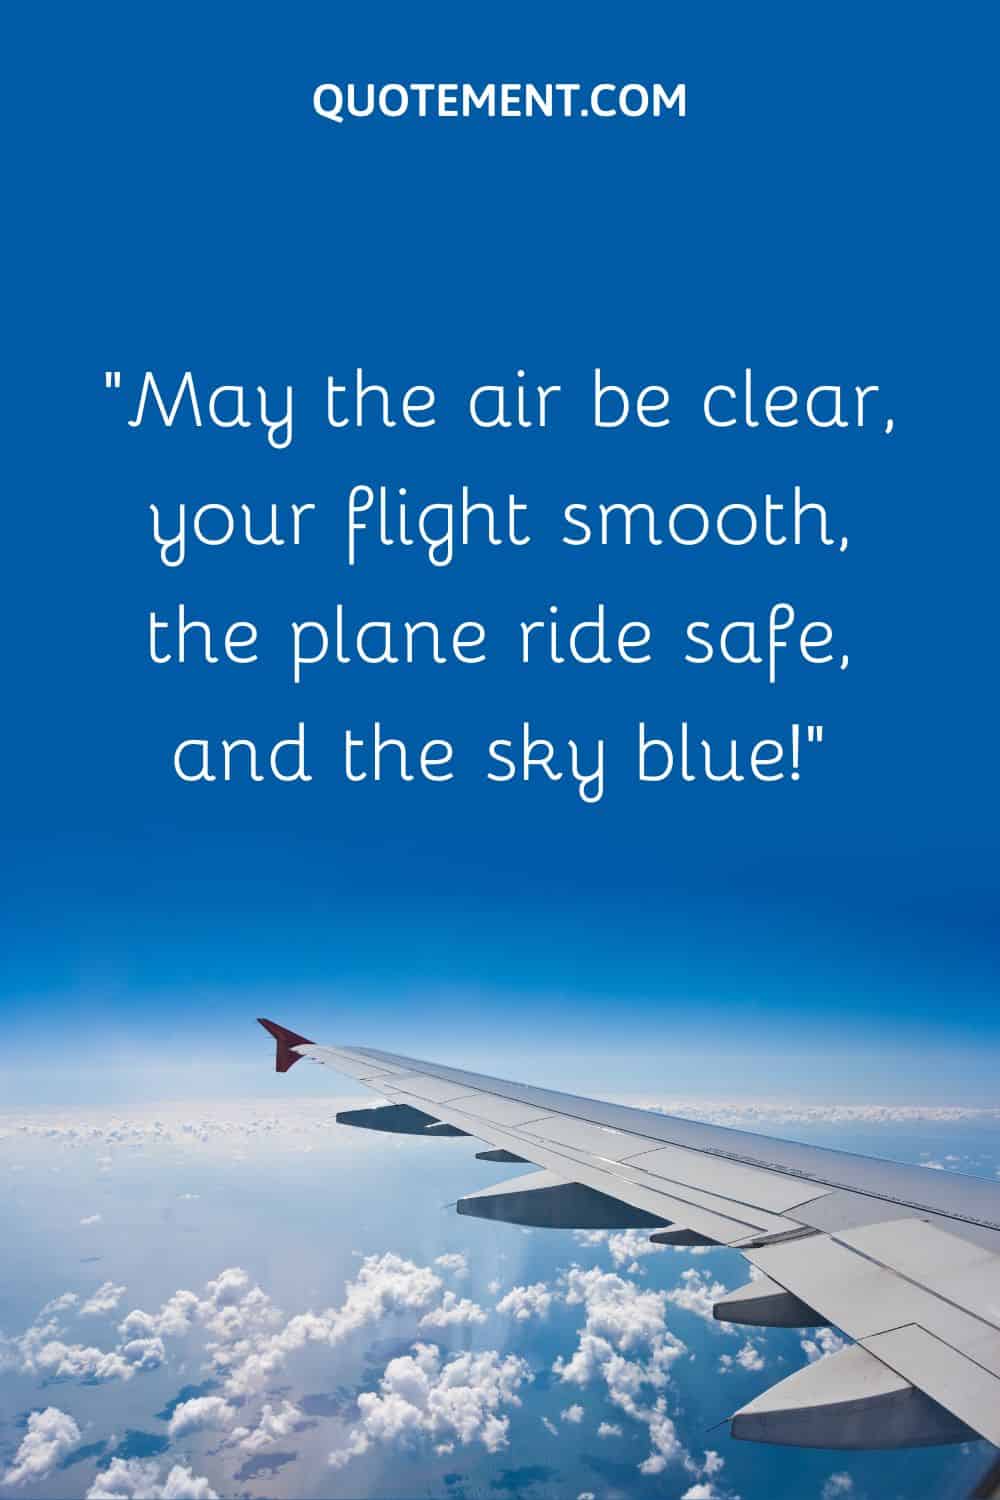 May the air be clear, your flight smooth, the plane ride safe, and the sky blue